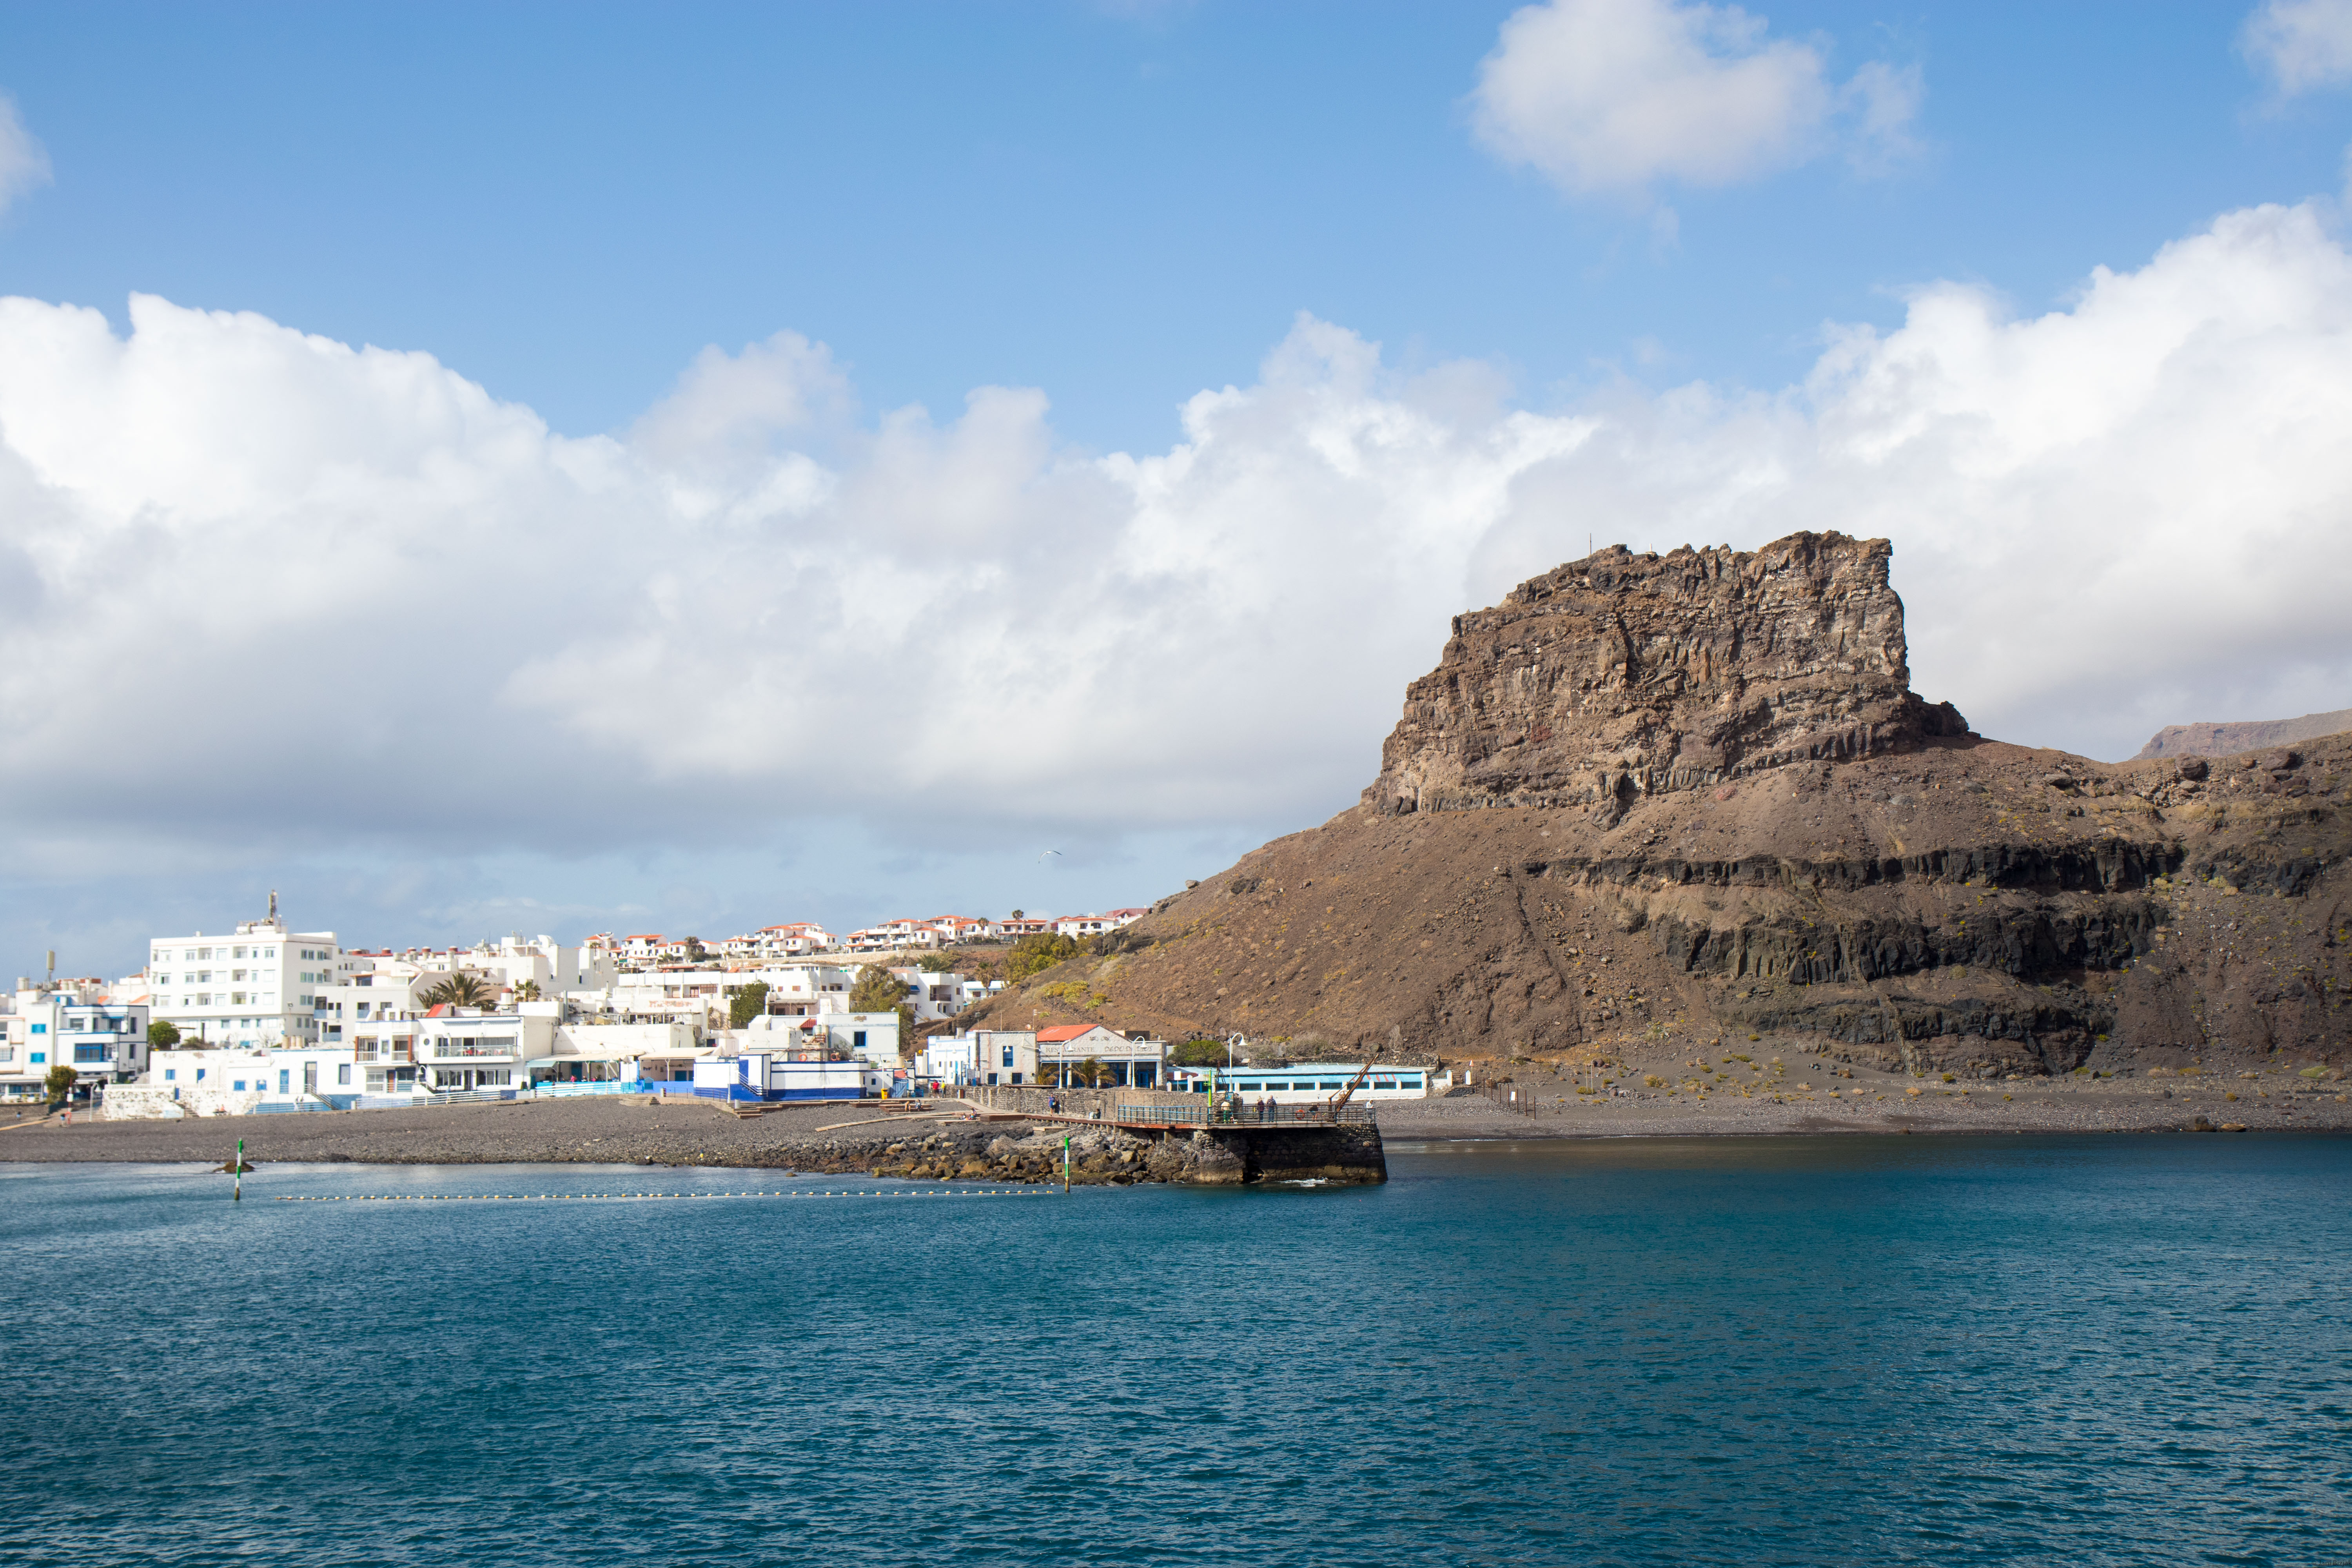 Port for ferry to Tenerife